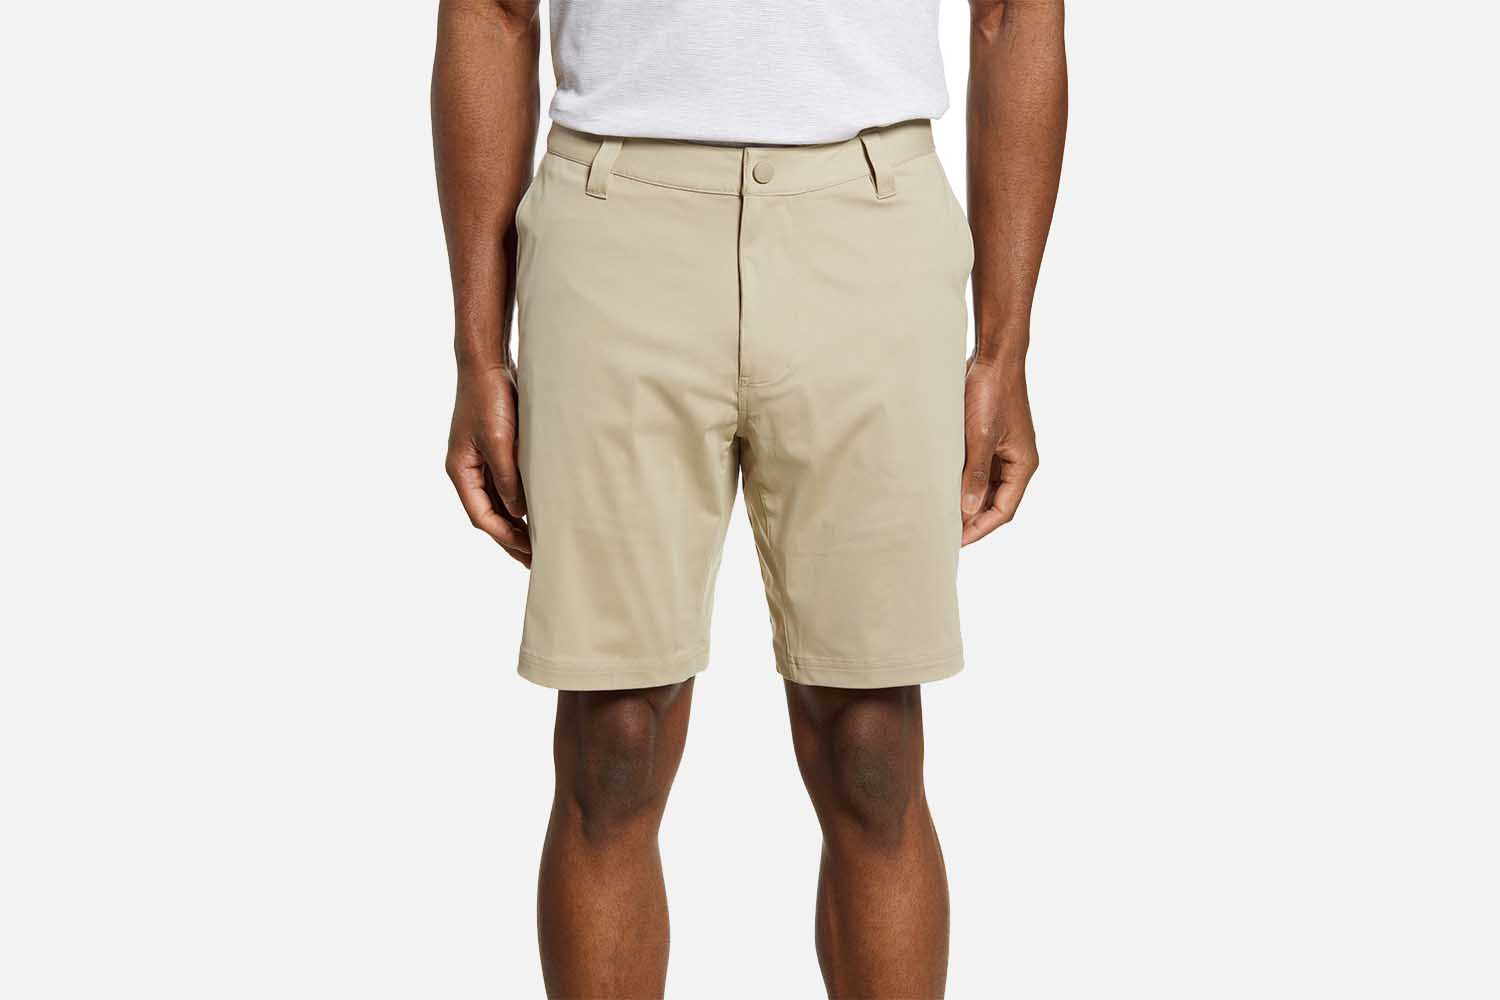 Deal: These Rhone Commuter Shorts Are 50% Off